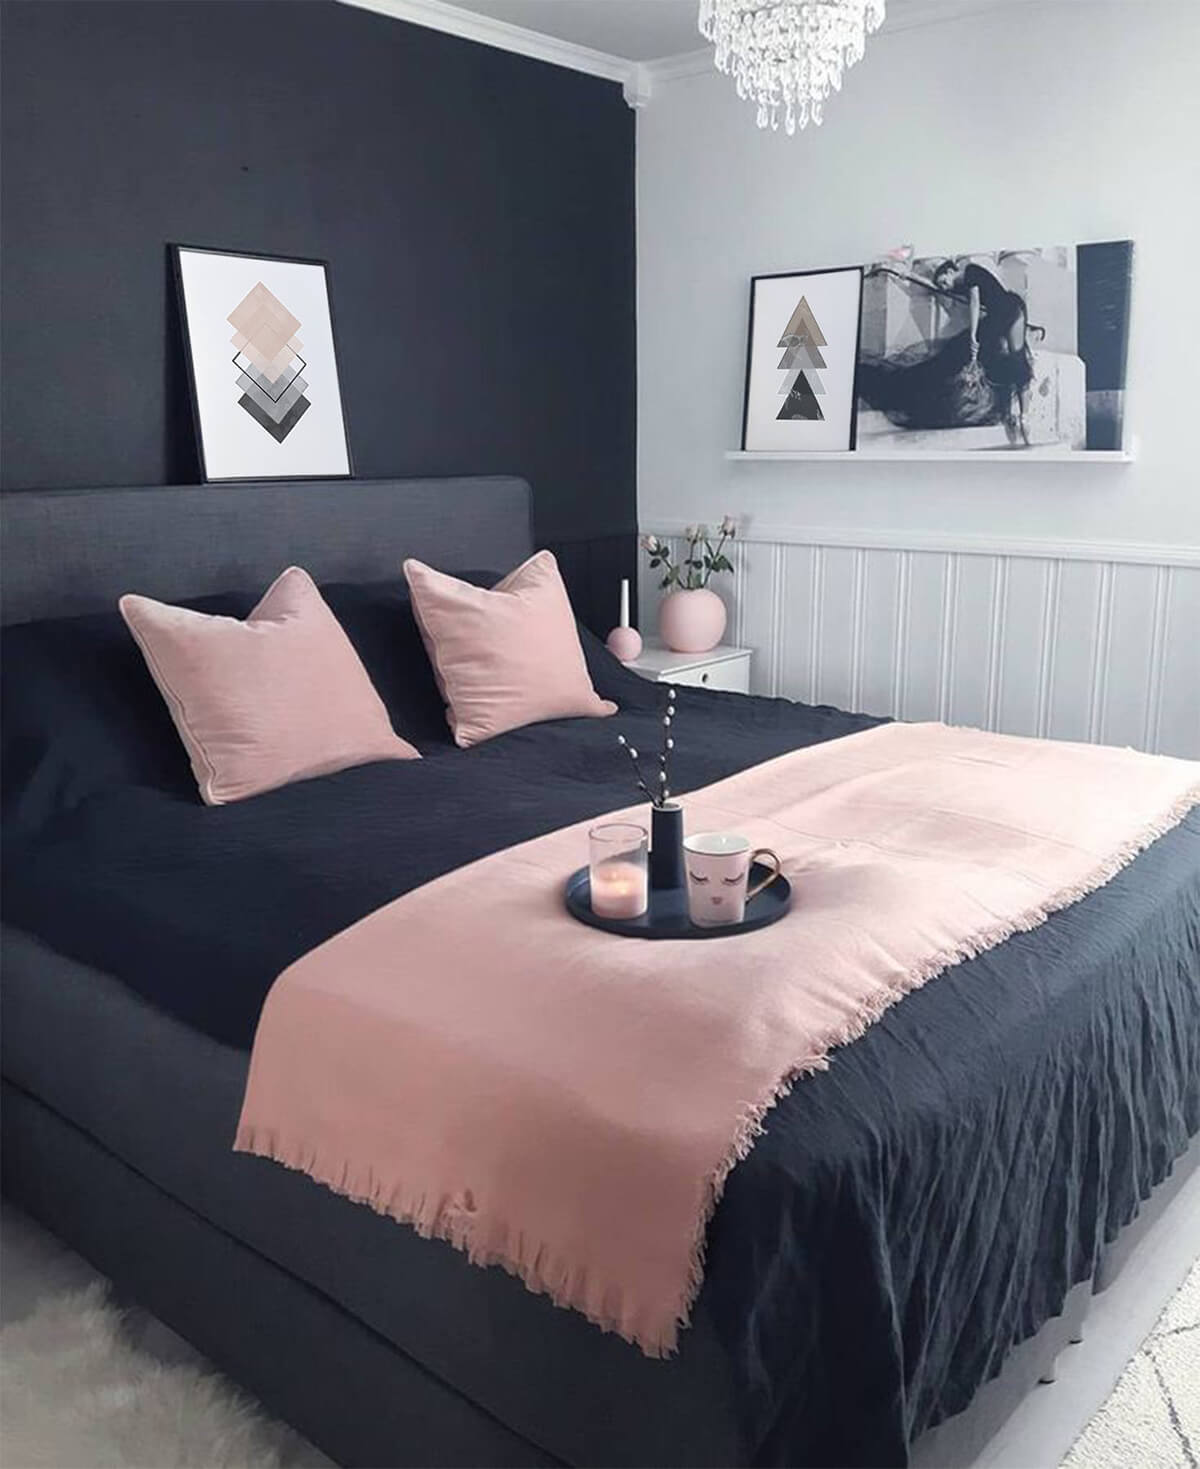 16 Best Navy Blue Bedroom Decor Ideas For A Timeless Makeover In 2021 The product of red and white, pink is associated with the charming qualities of playfulness, sweetness choose shocking pink accents with deep navy or charcoal. 16 best navy blue bedroom decor ideas